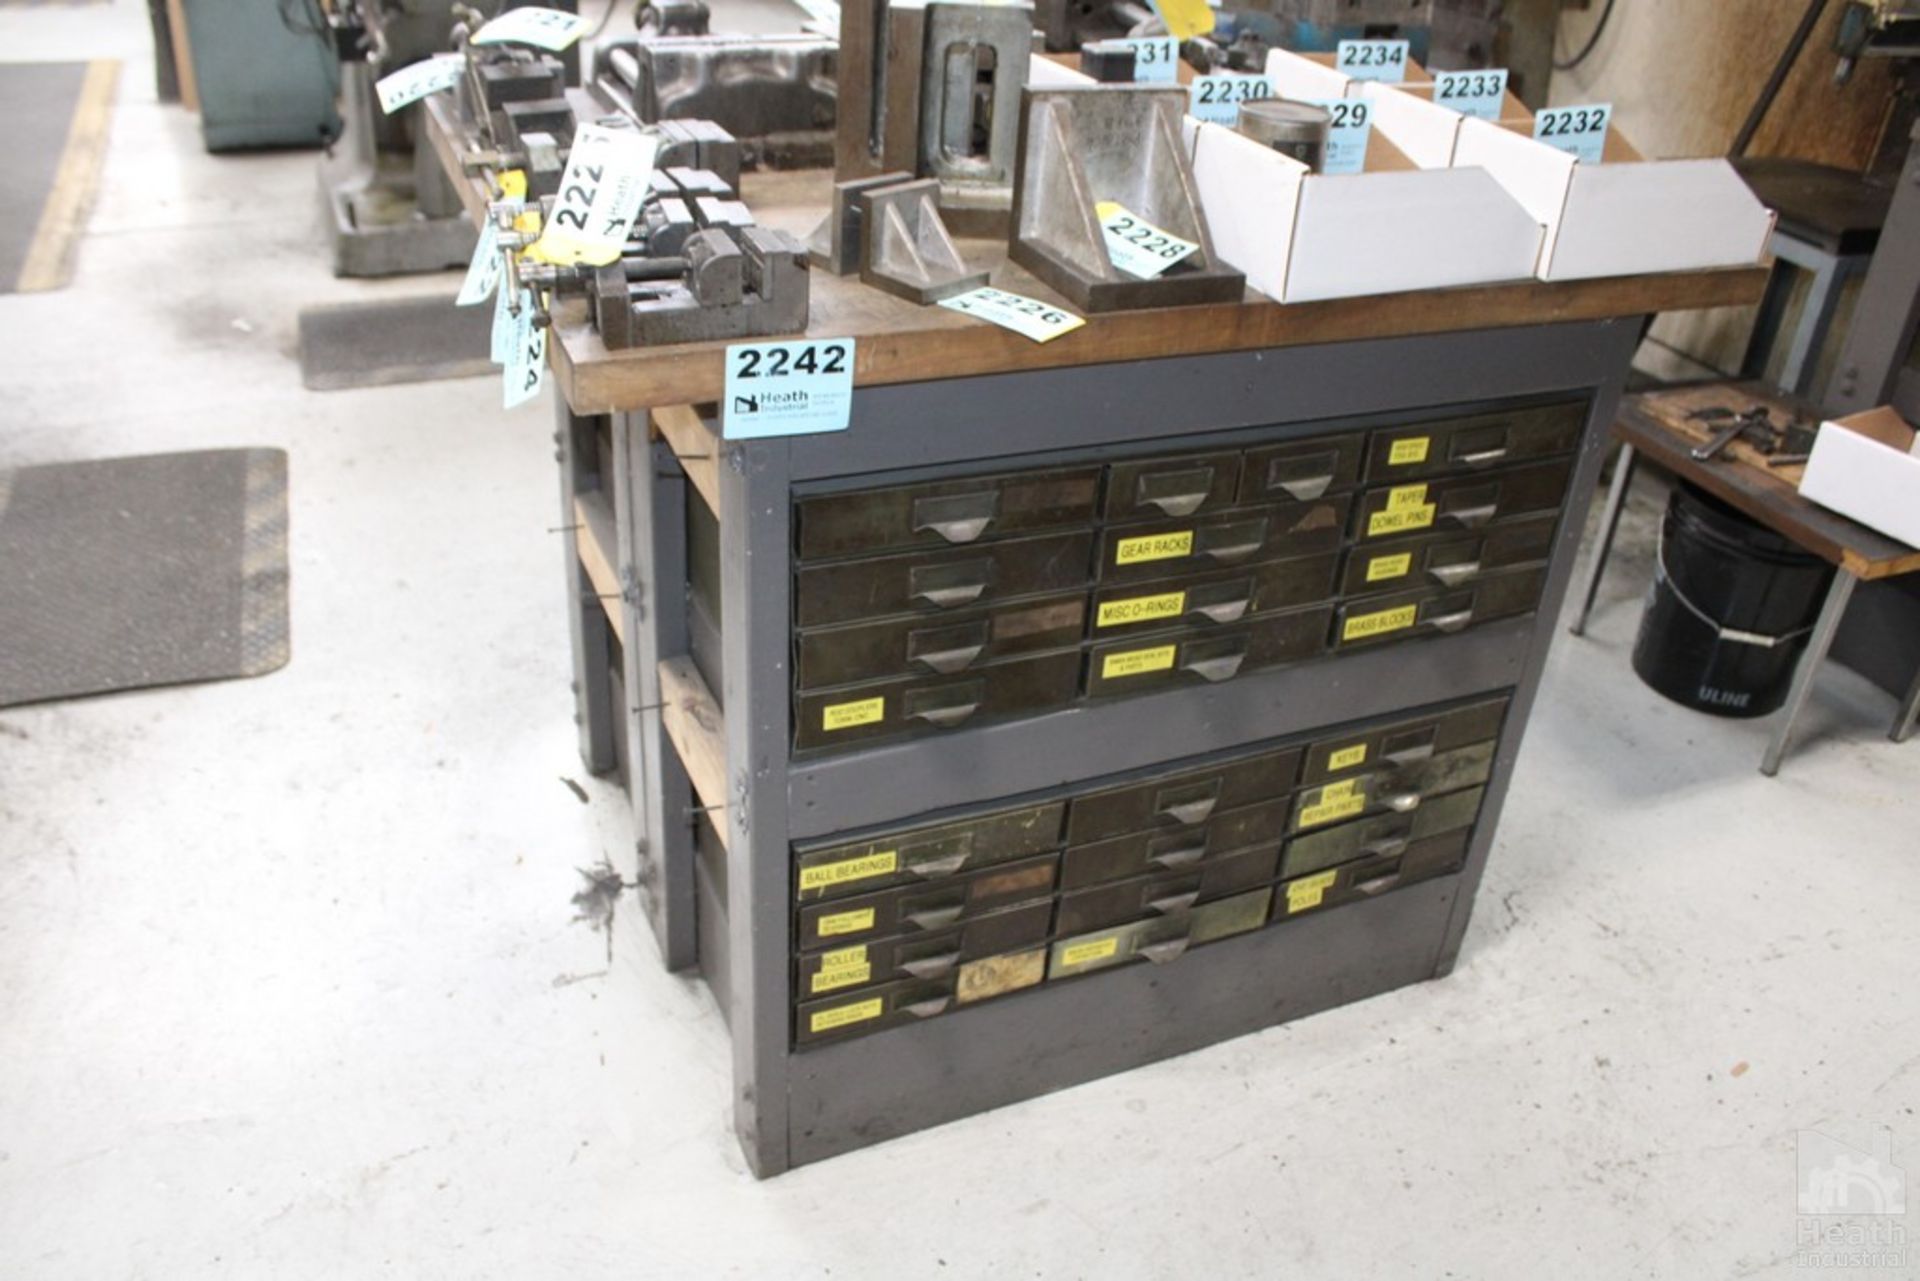 (4) PARTS CABINETS WITH CONTENTS - BEARINGS, GEAR RACKS, ETC.